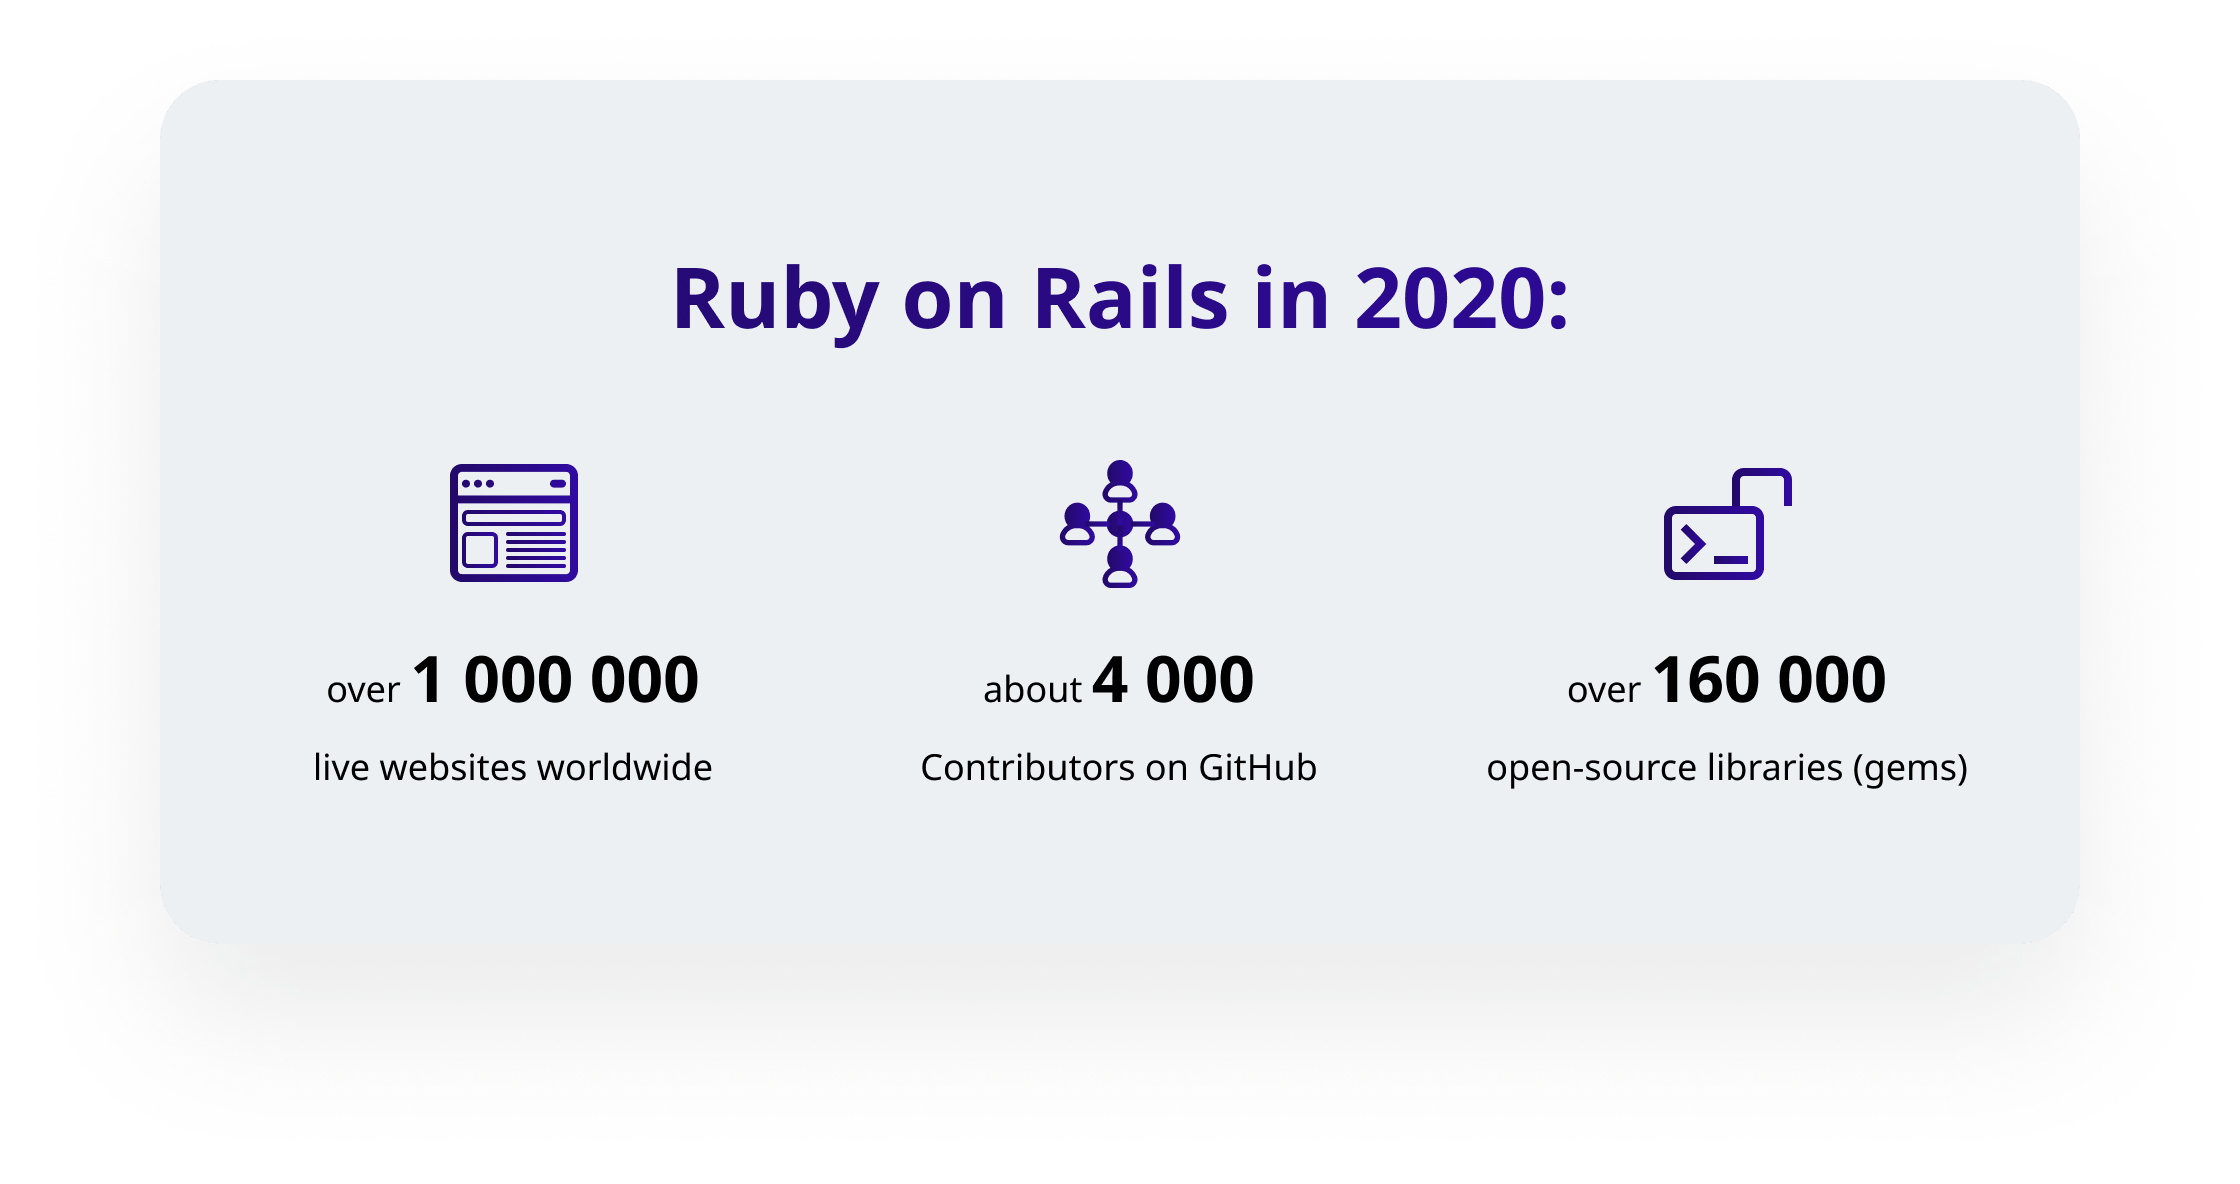 Reddit for Ruby on Rails enthusiasts